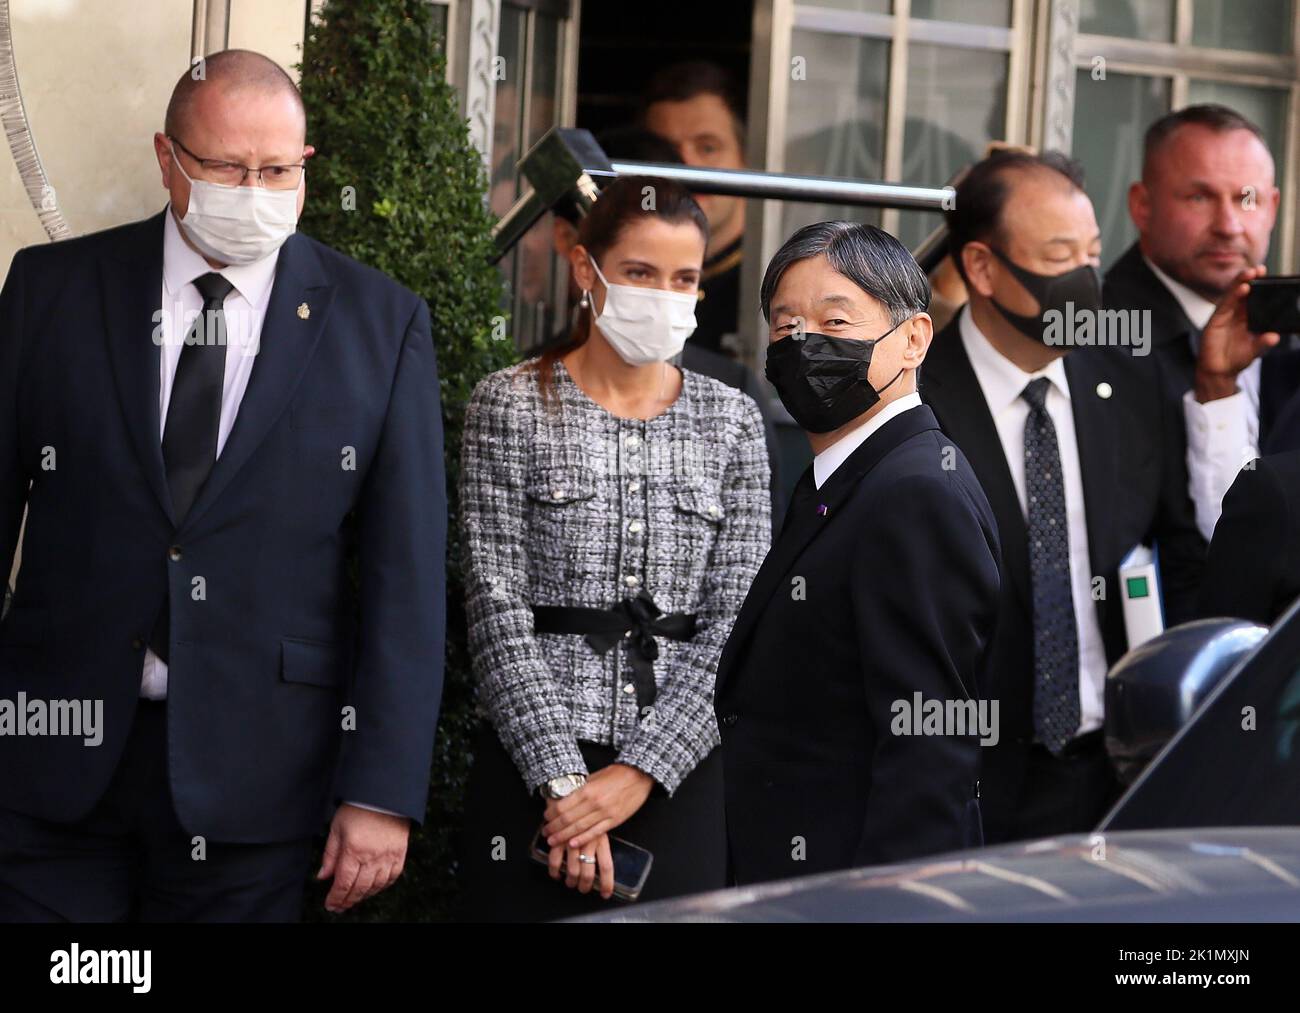 Emperor Naruhito of Japan arrives at Claridge's five star hotel in London after he attended the State Funeral of British Monarch Queen Elizabeth II. Stock Photo